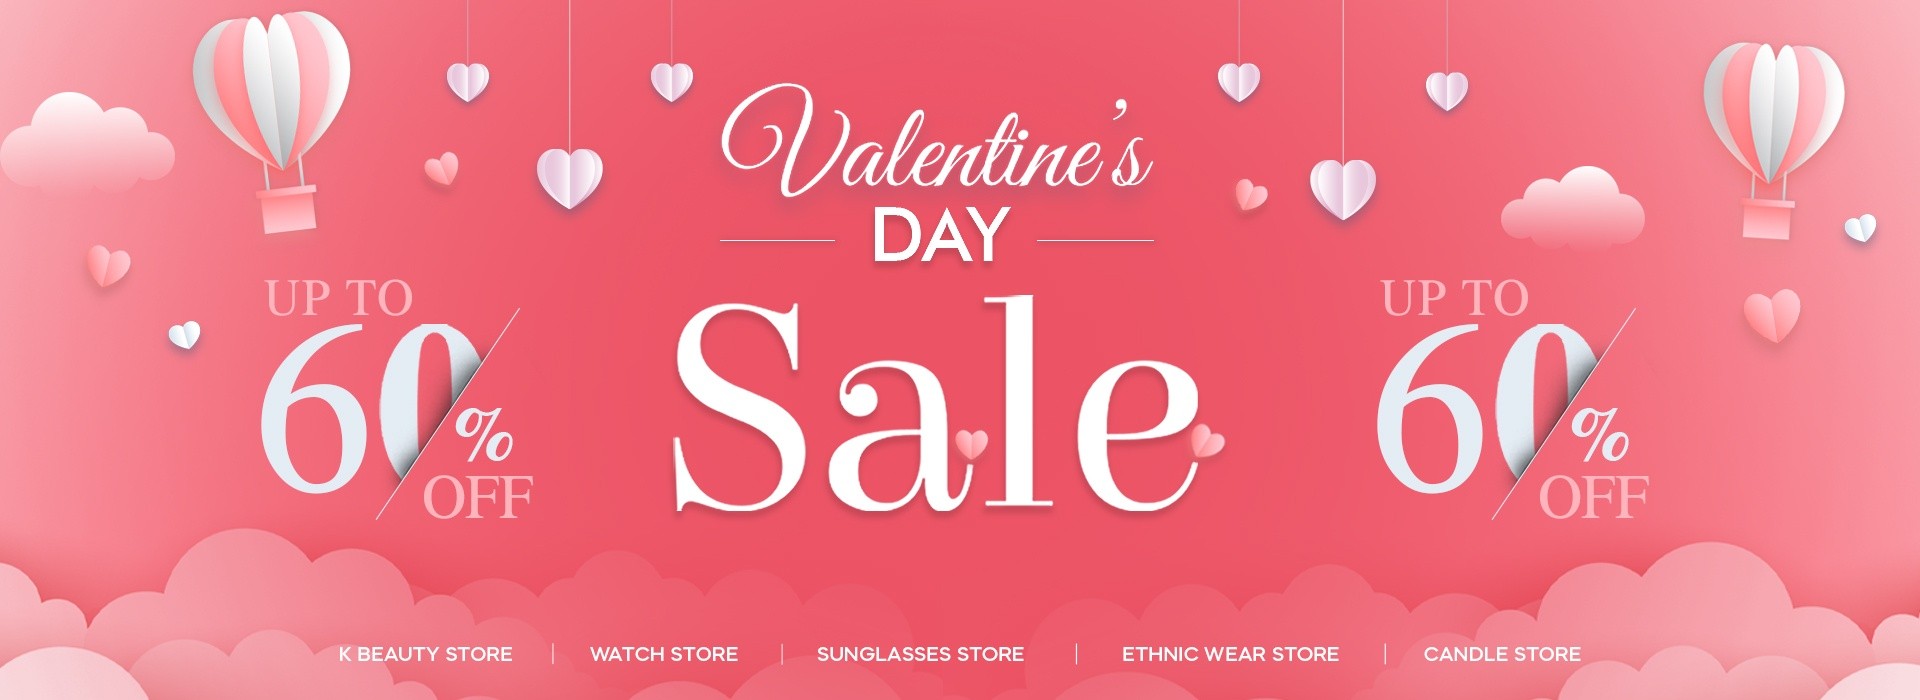 valentine's day clearance sale